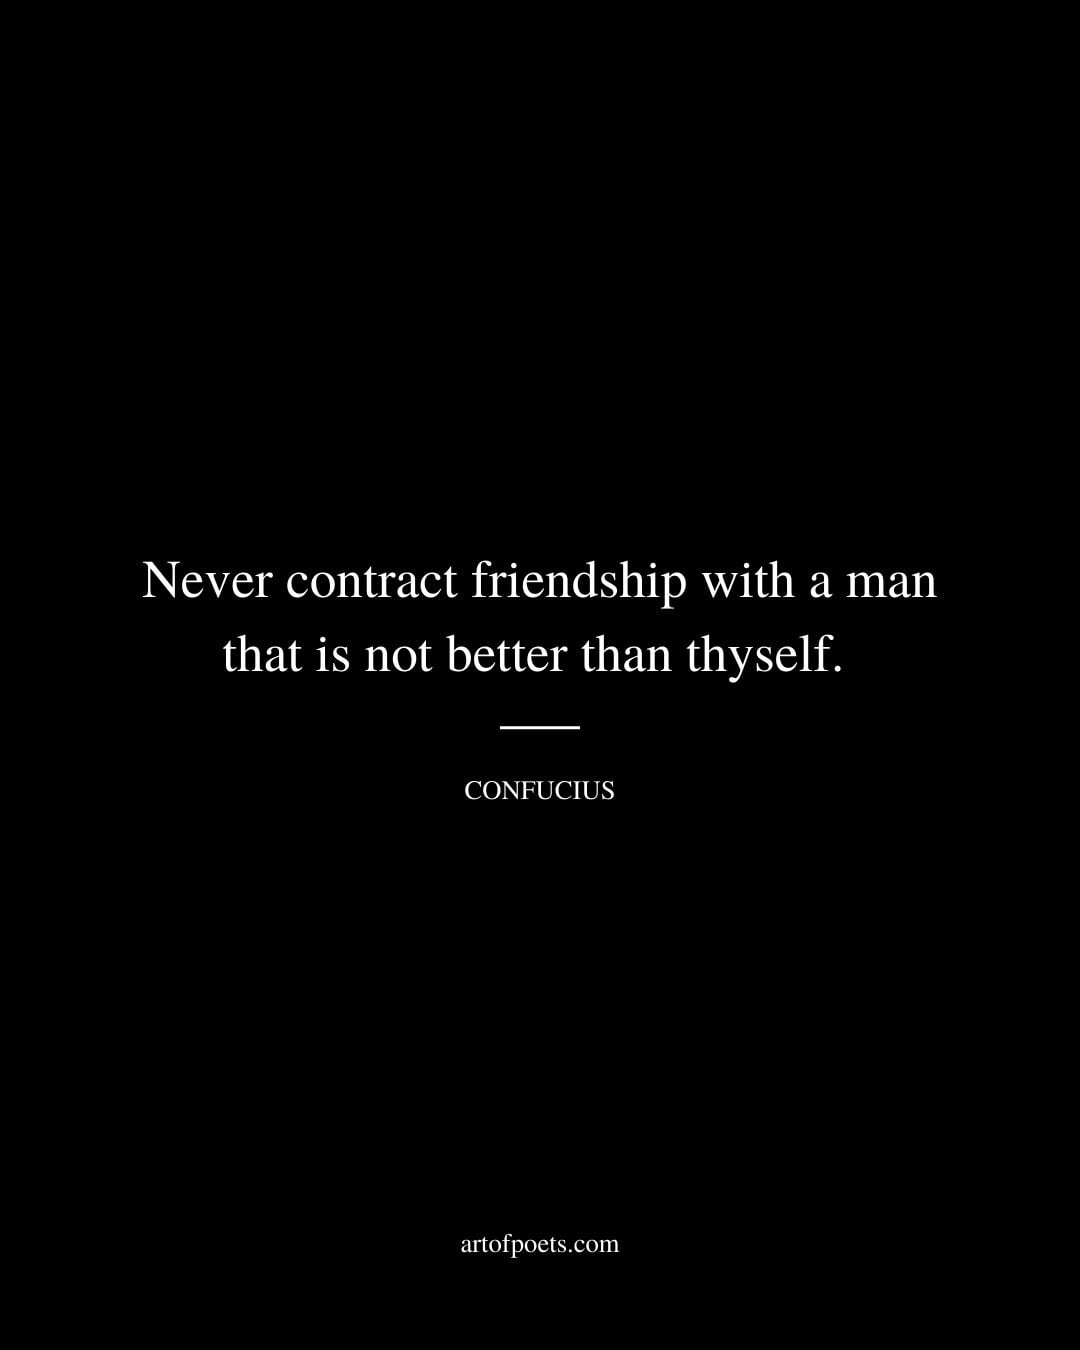 Never contract friendship with a man that is not better than thyself